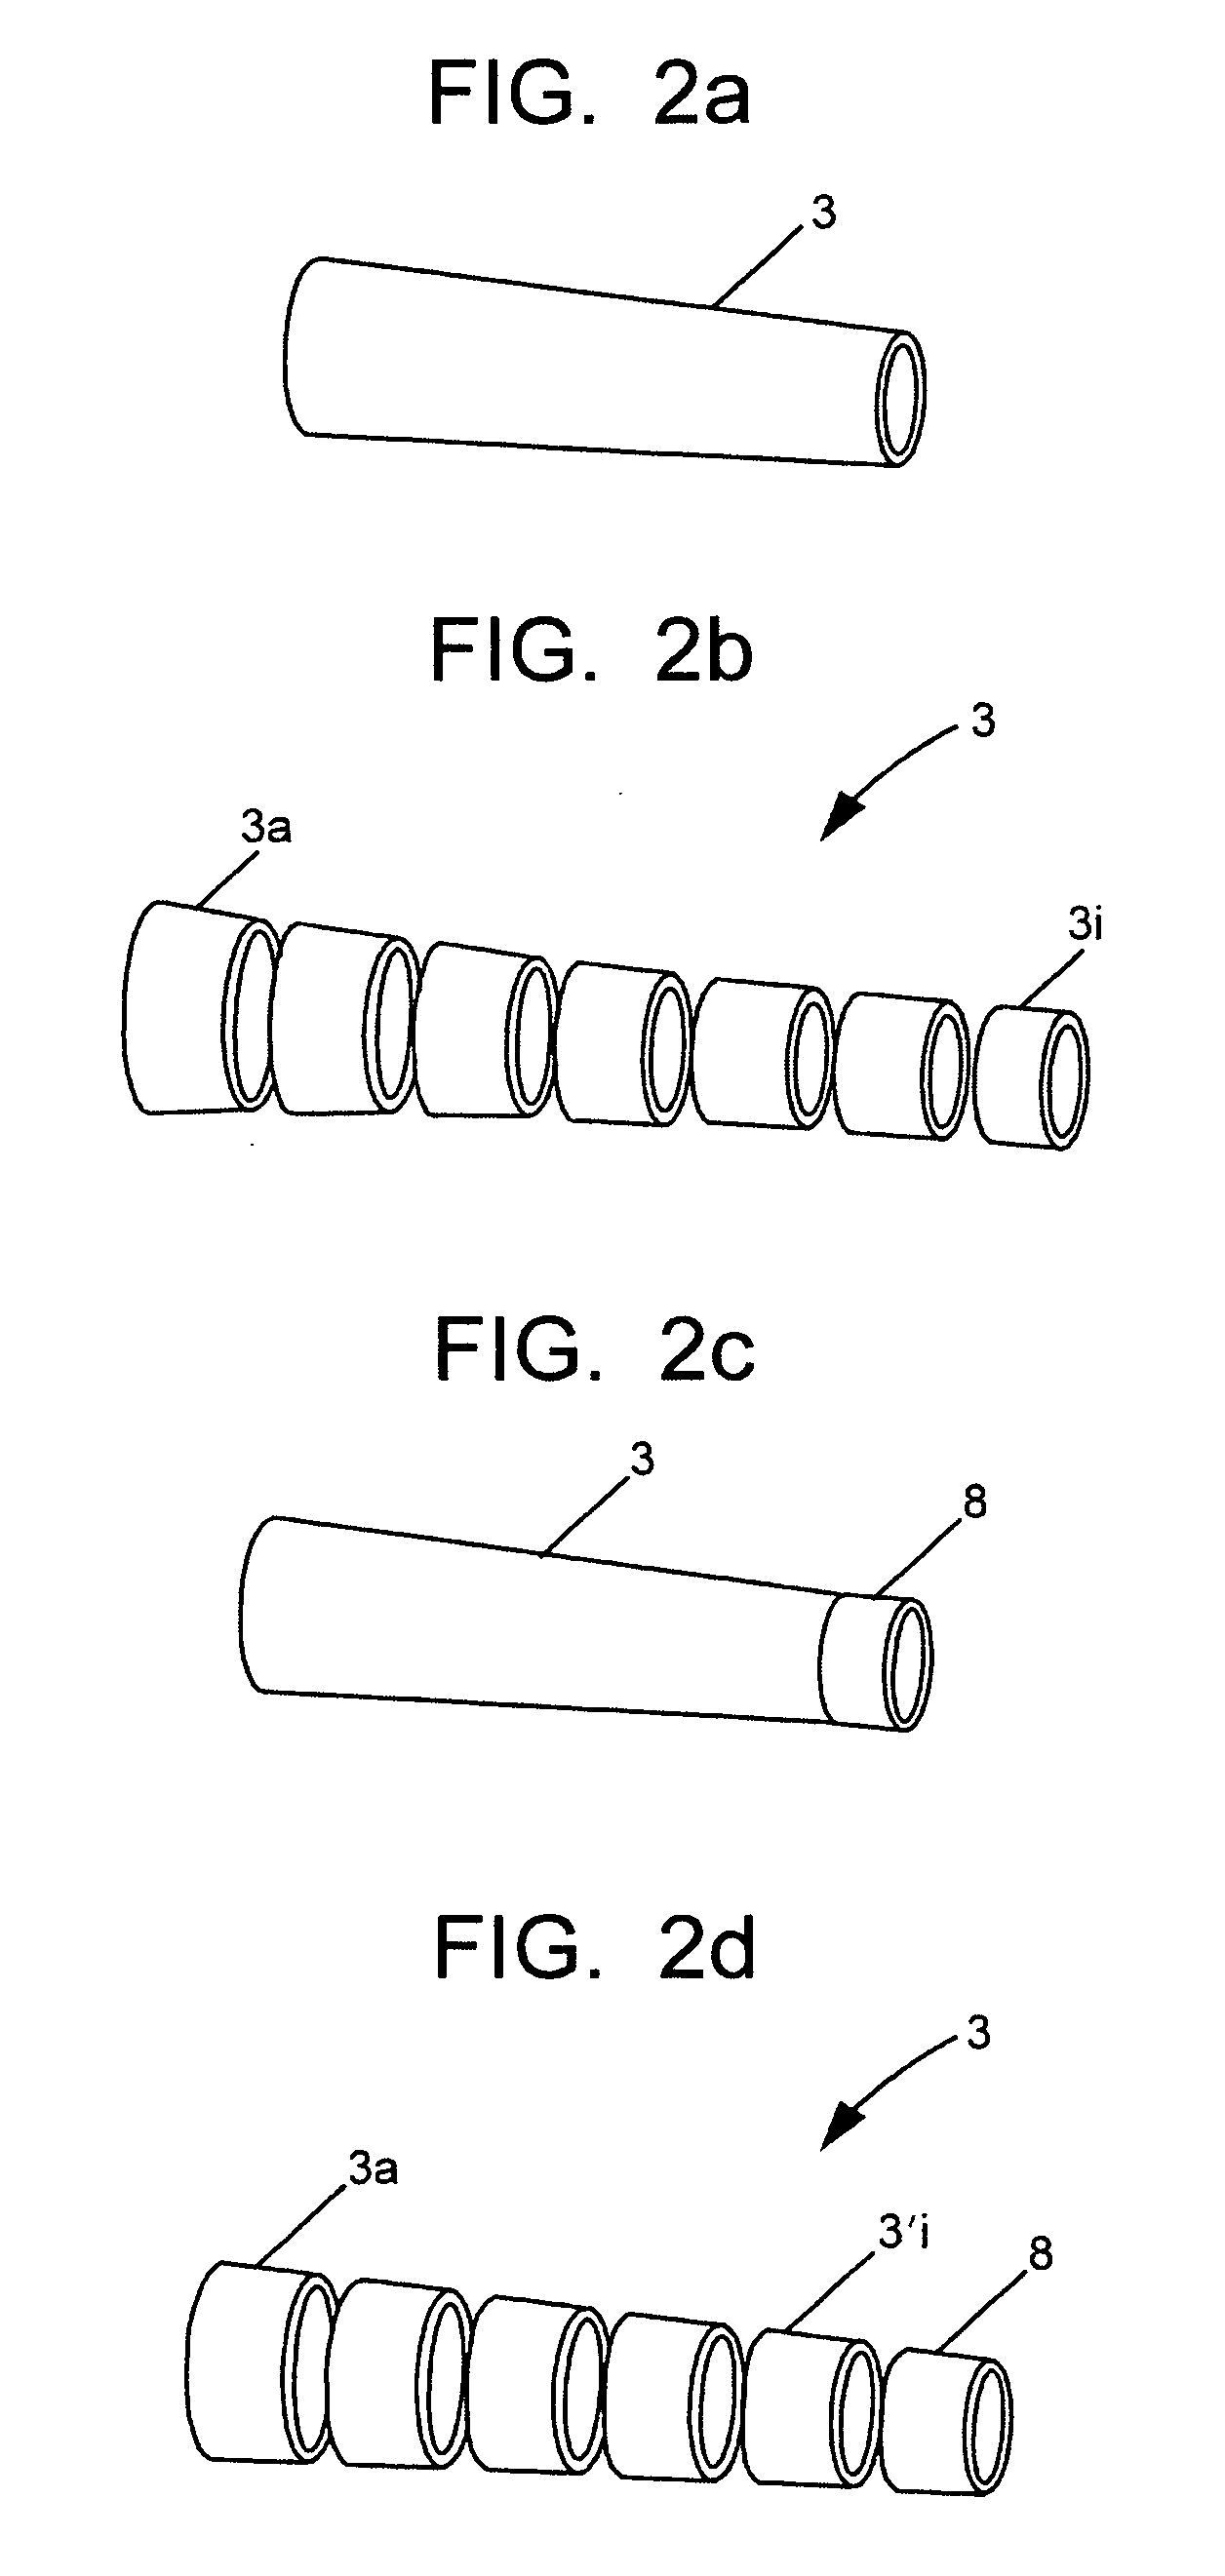 Process of continuous manufacturing and installation of a thermally or electrically insulated tube or cable